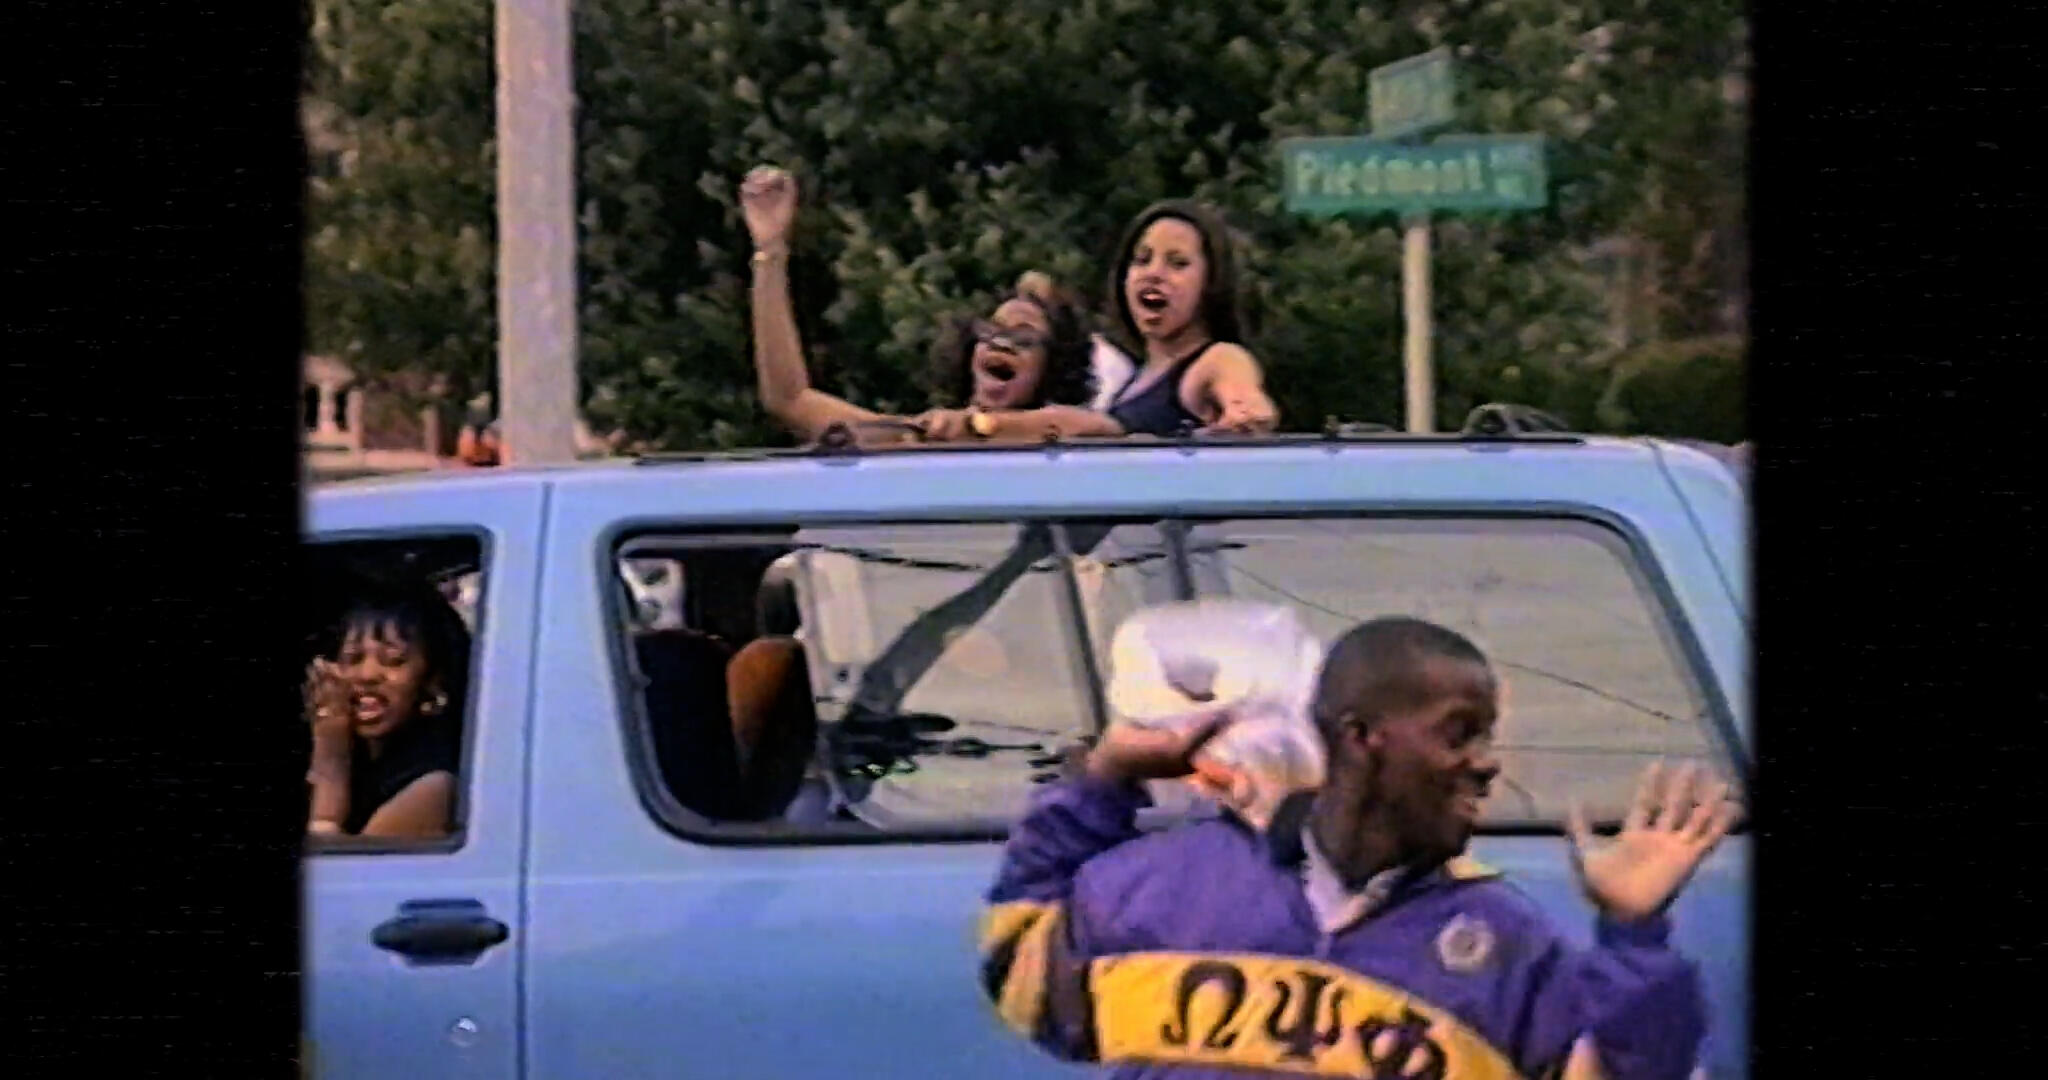 'Freaknik: The Wildest Story Never Told' On Hulu: Jermaine Dupri And Uncle Luke Talk About The Doc And Atlanta History